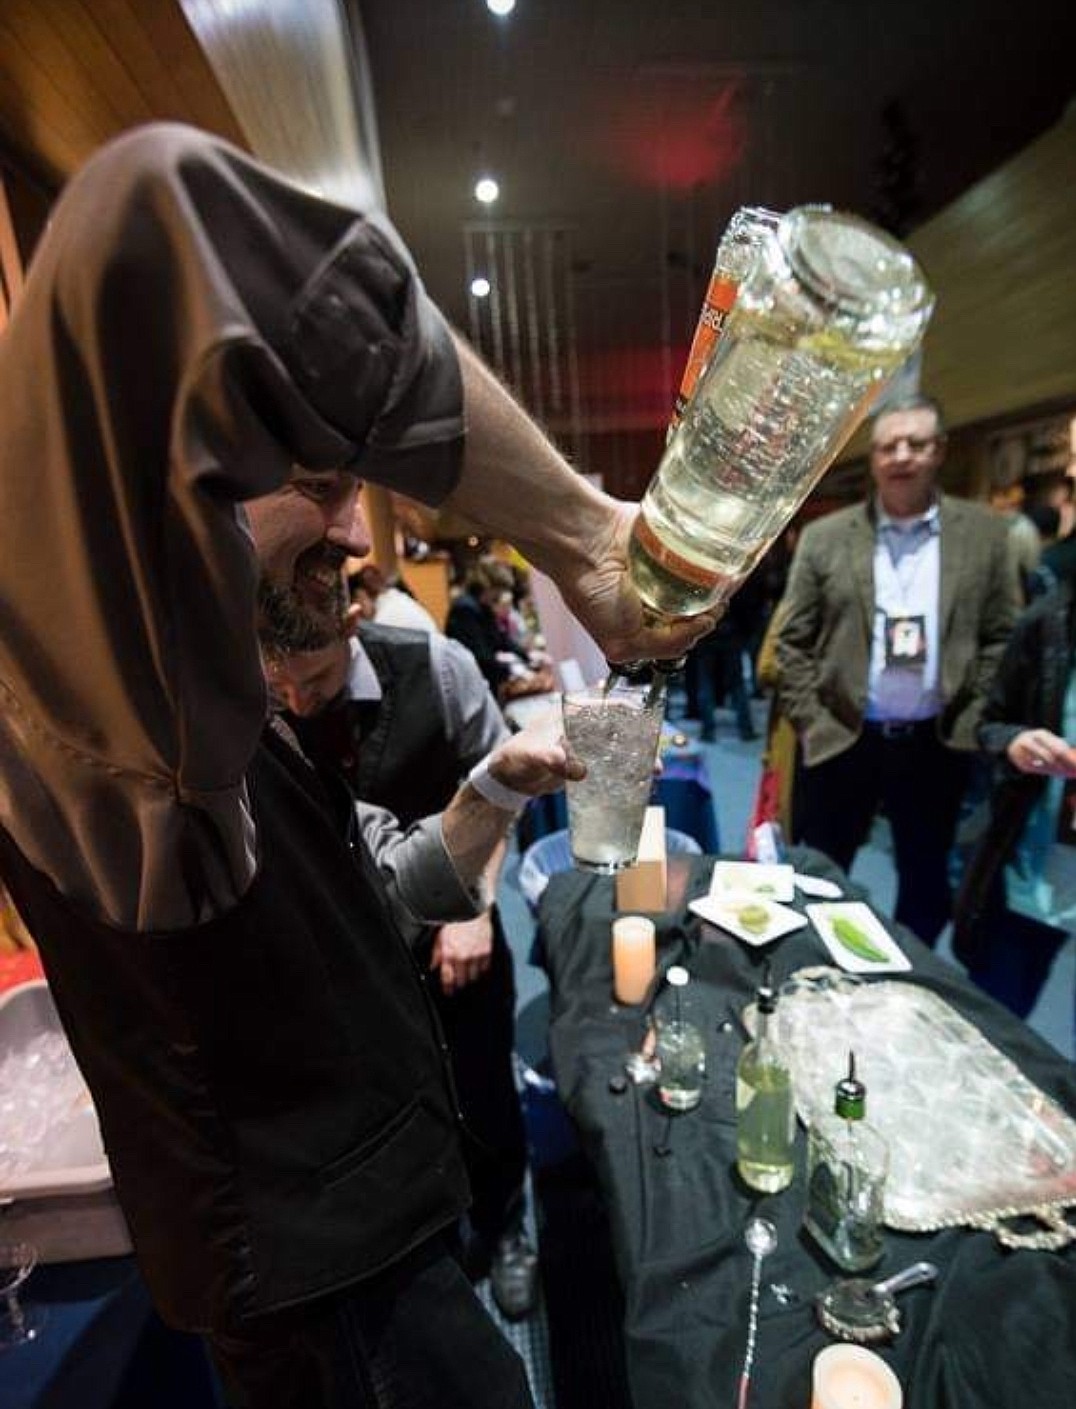 Michael Irby pours a drink at a past Help Every Little Paw (H.E.L.P.) Bartenders' Ball. This year's ball will start at 5 p.m. March 11 at the Coeur d'Alene Casino.